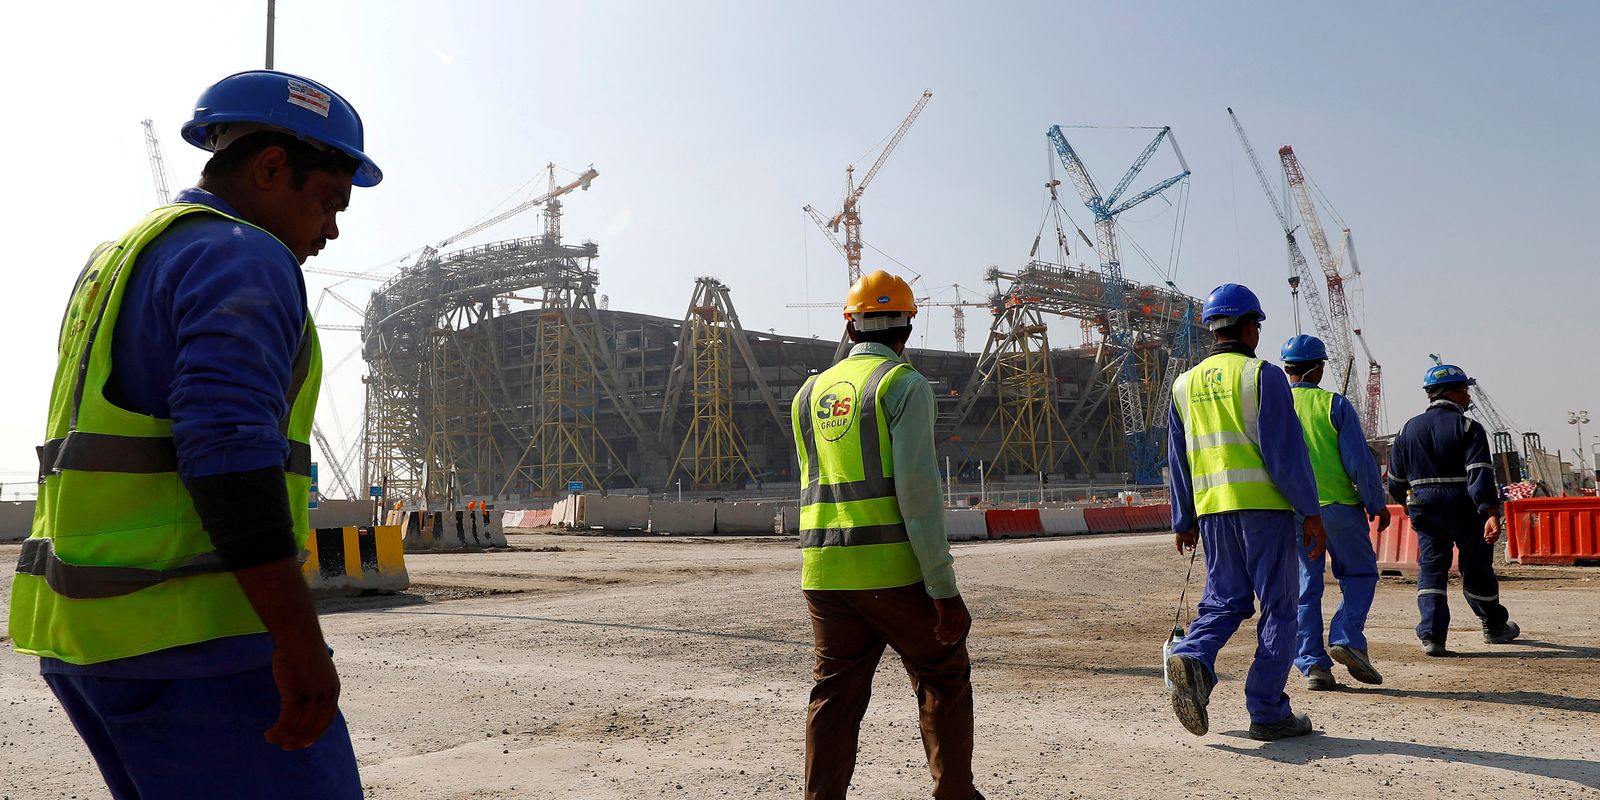 Qatar Cup workers sue American company for exploitation